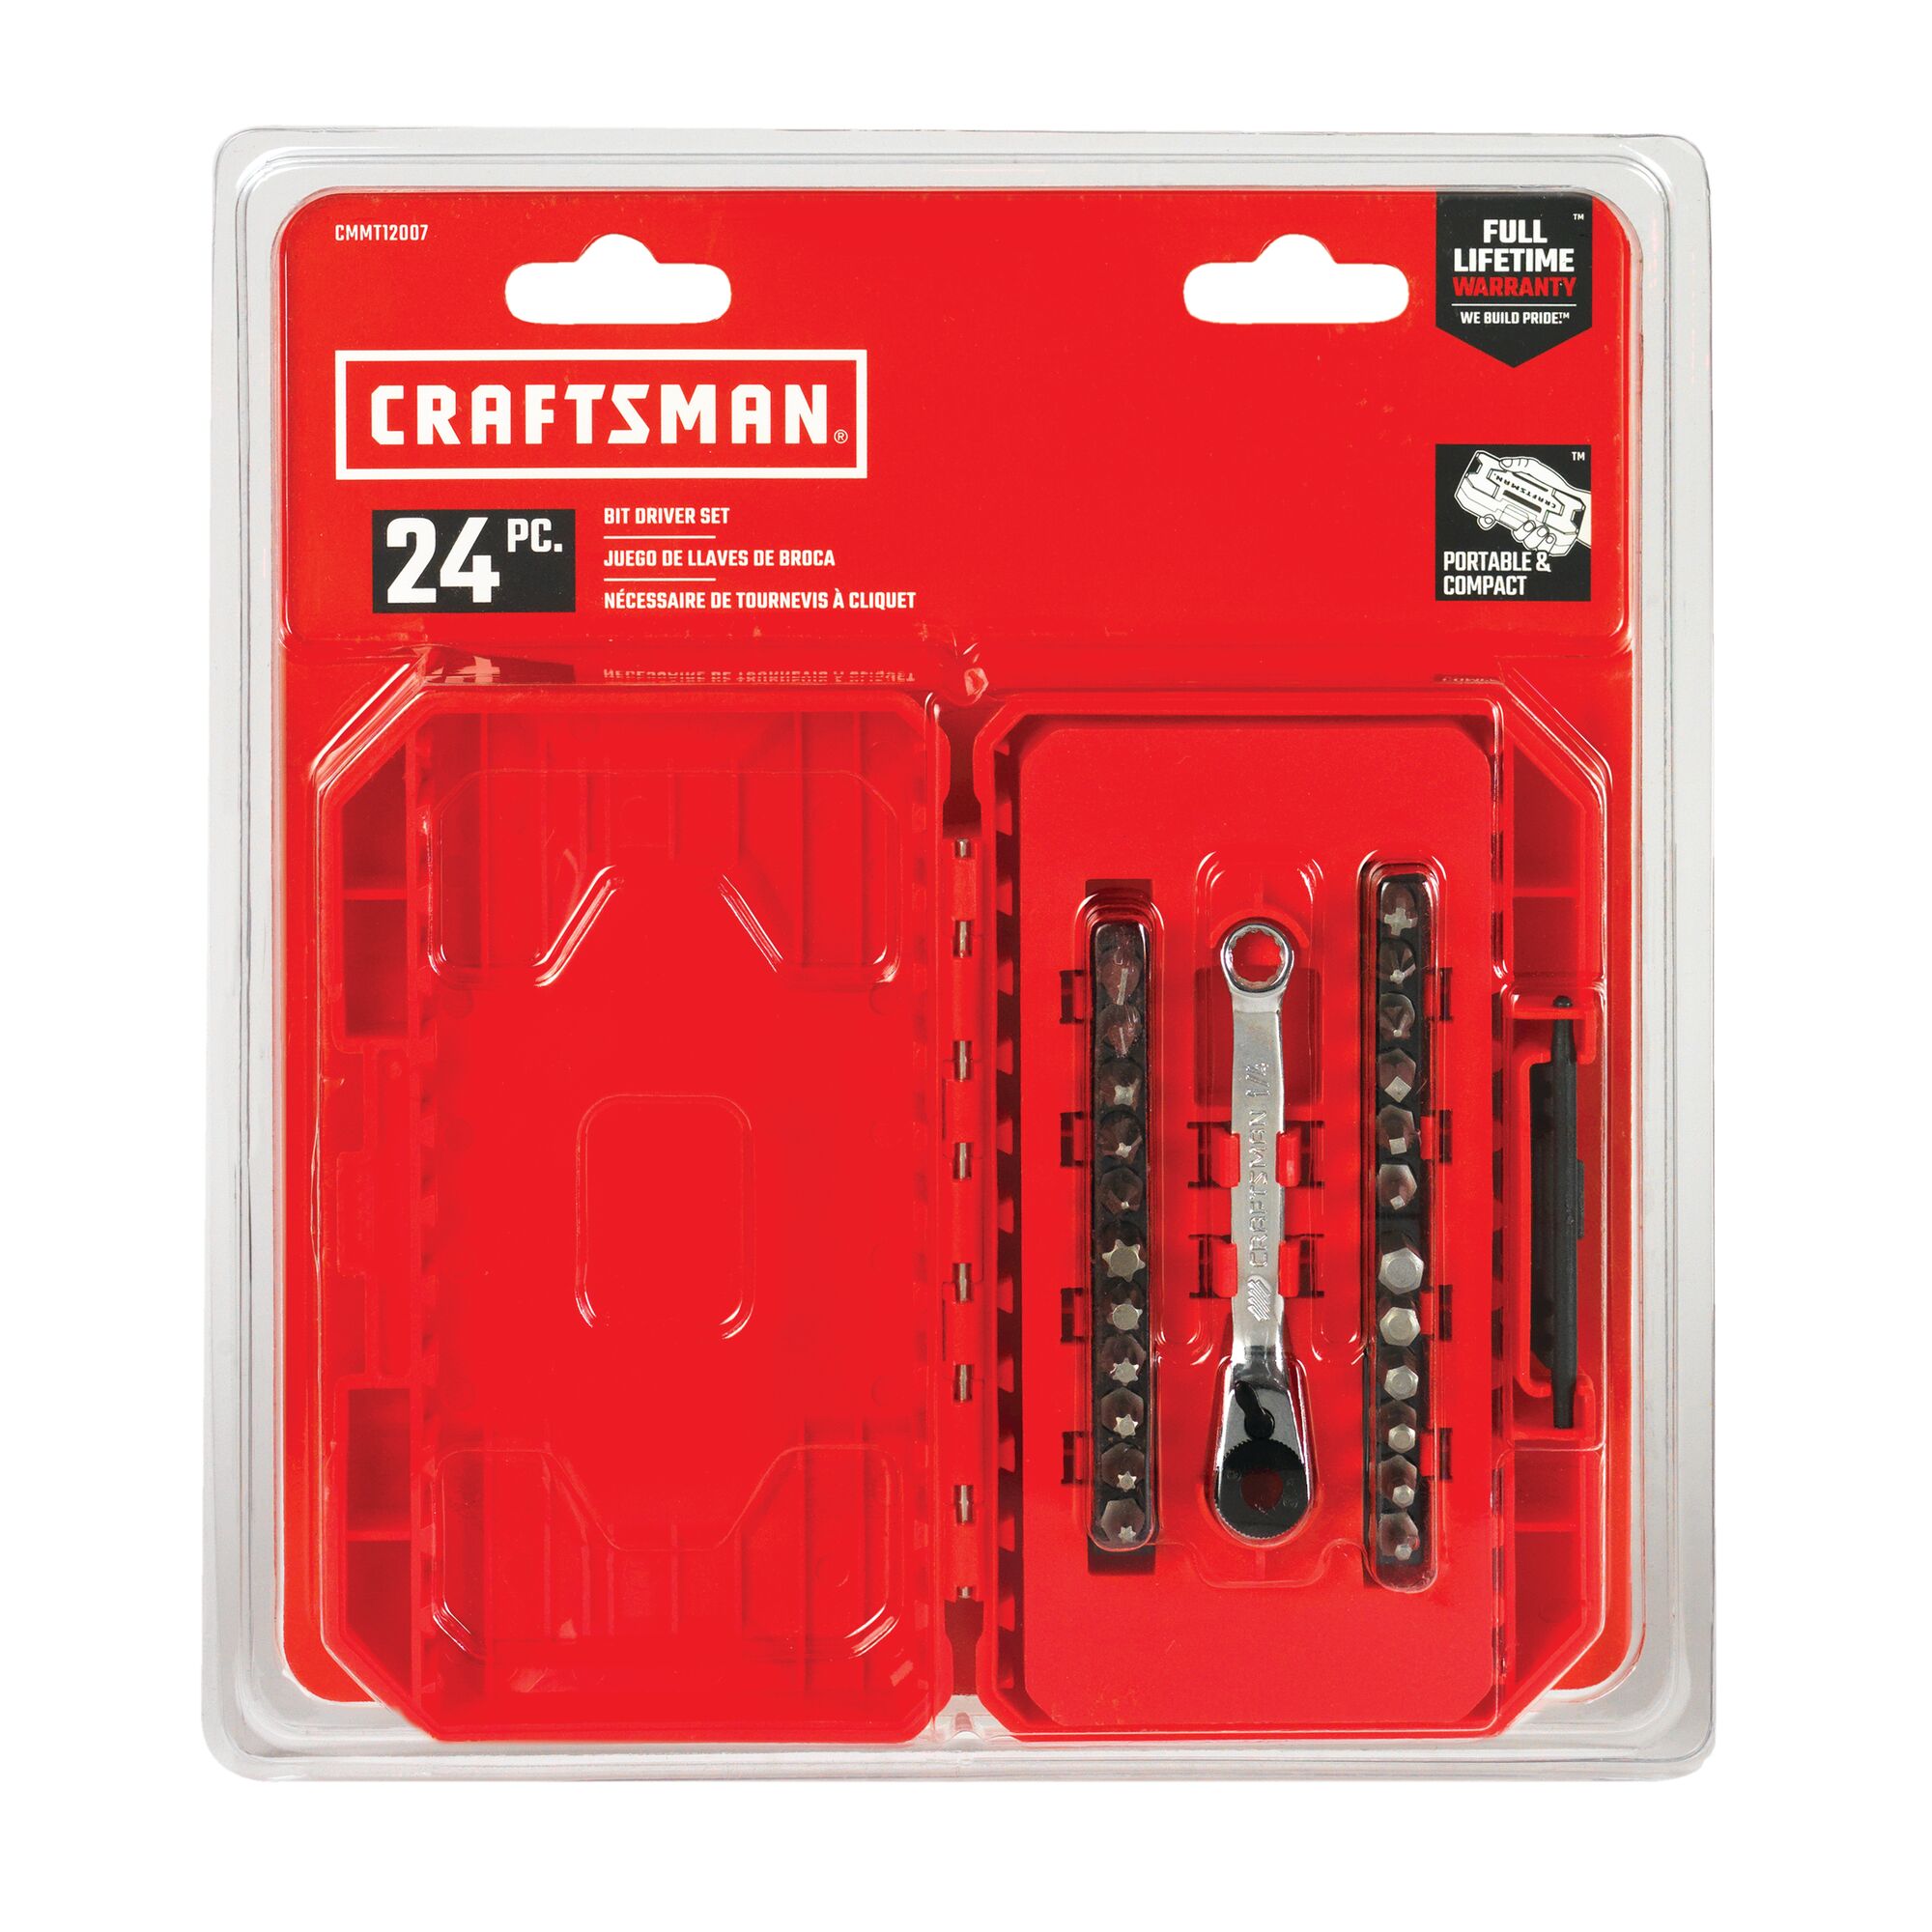 View of CRAFTSMAN Ratchets packaging